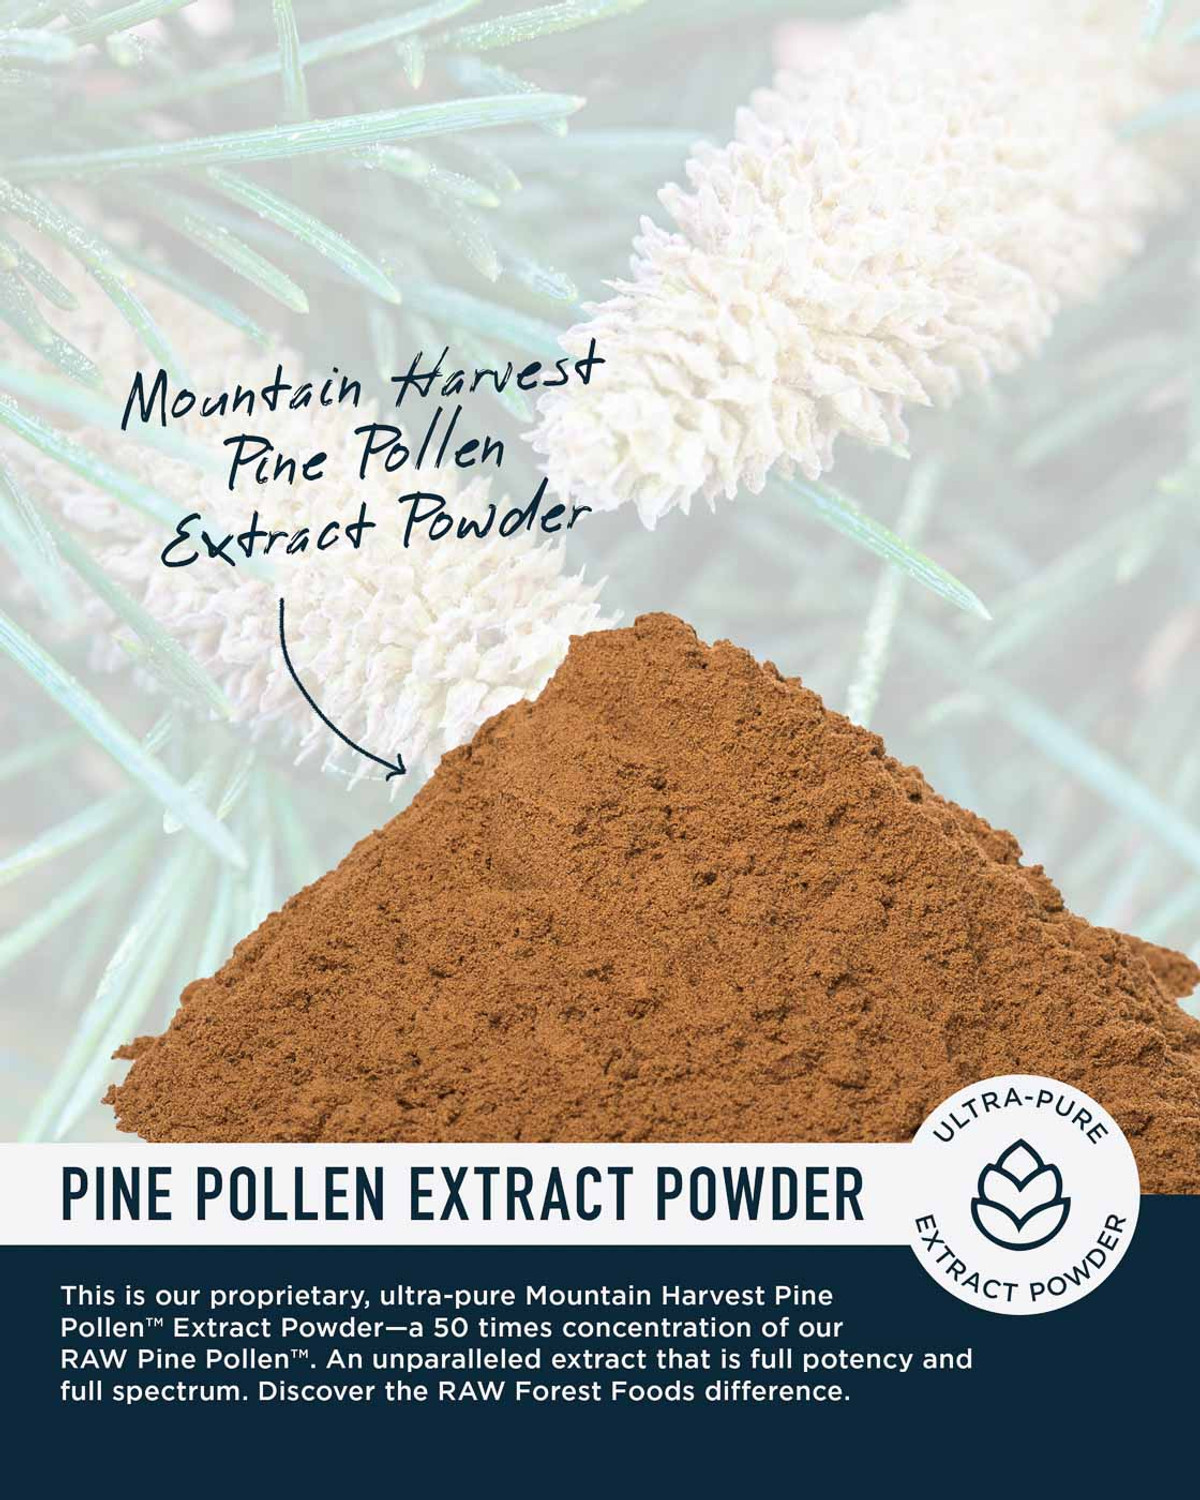 How to Harvest Pine Pollen - Curing Vision